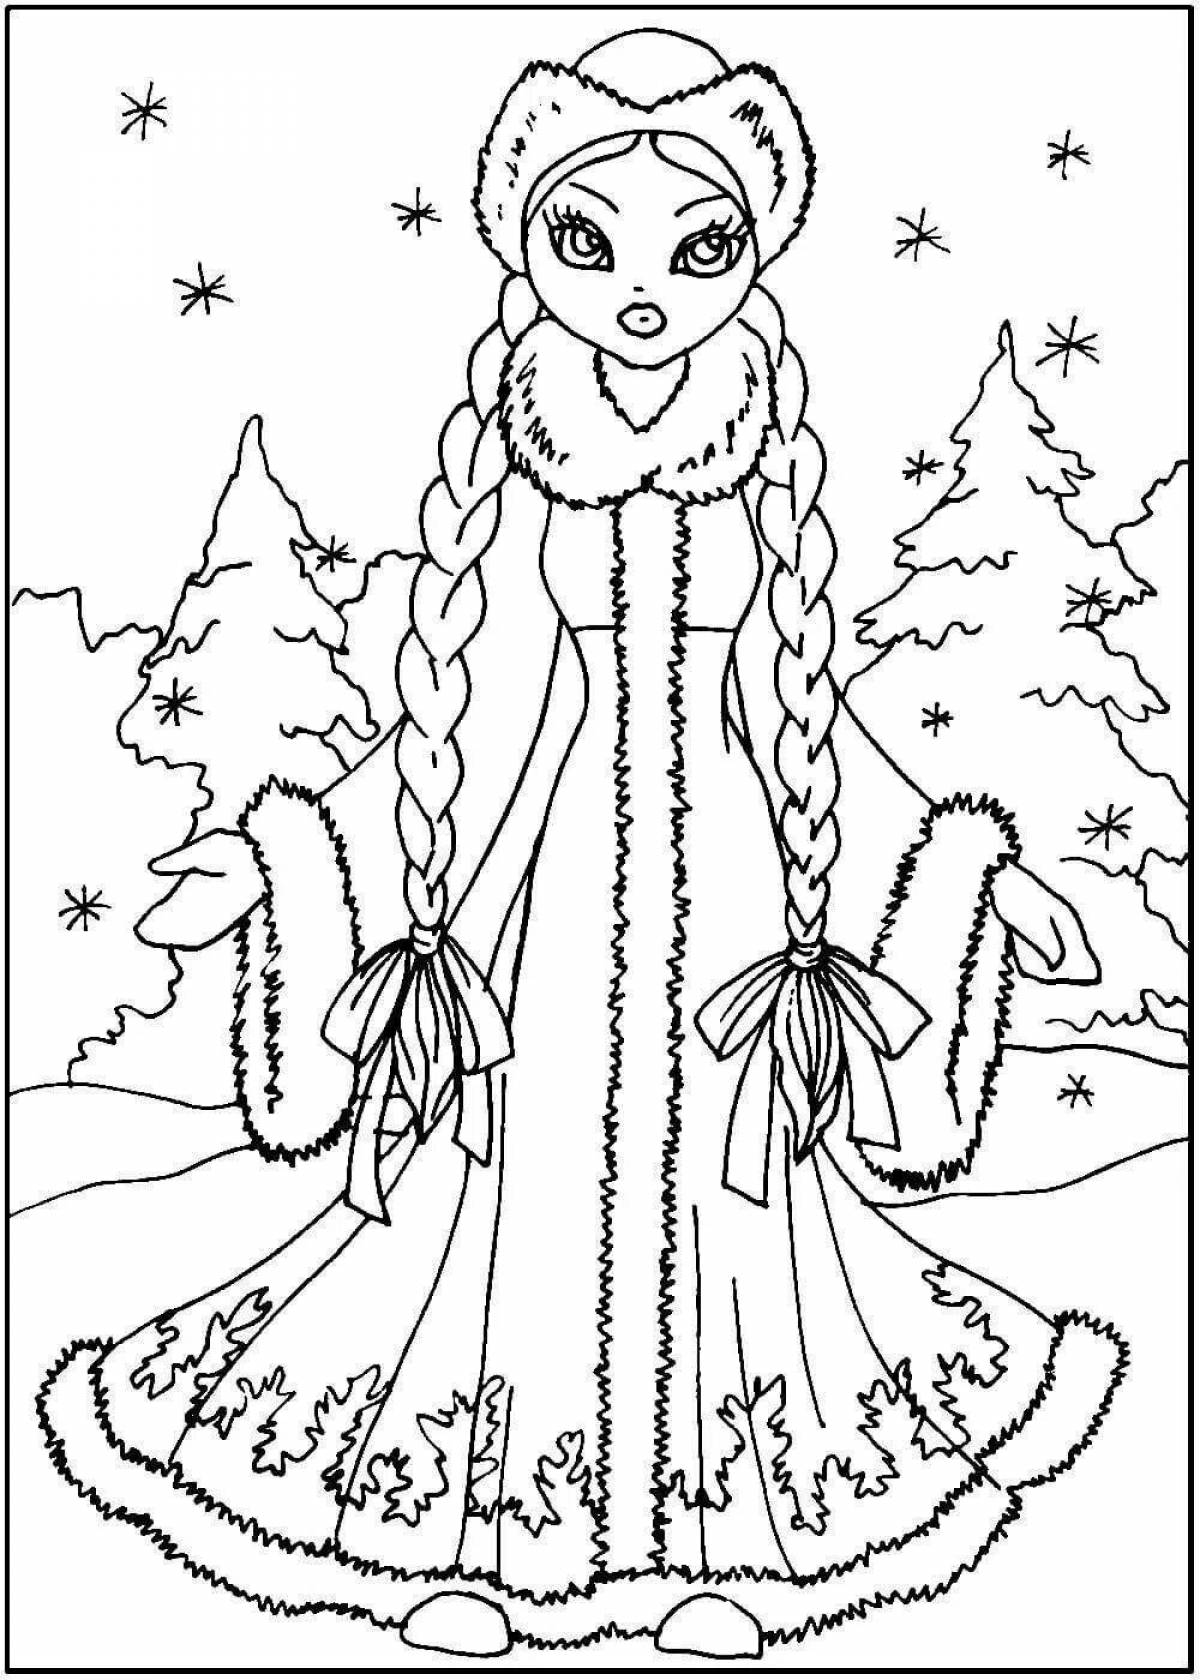 Coloring the face of a charming snow maiden